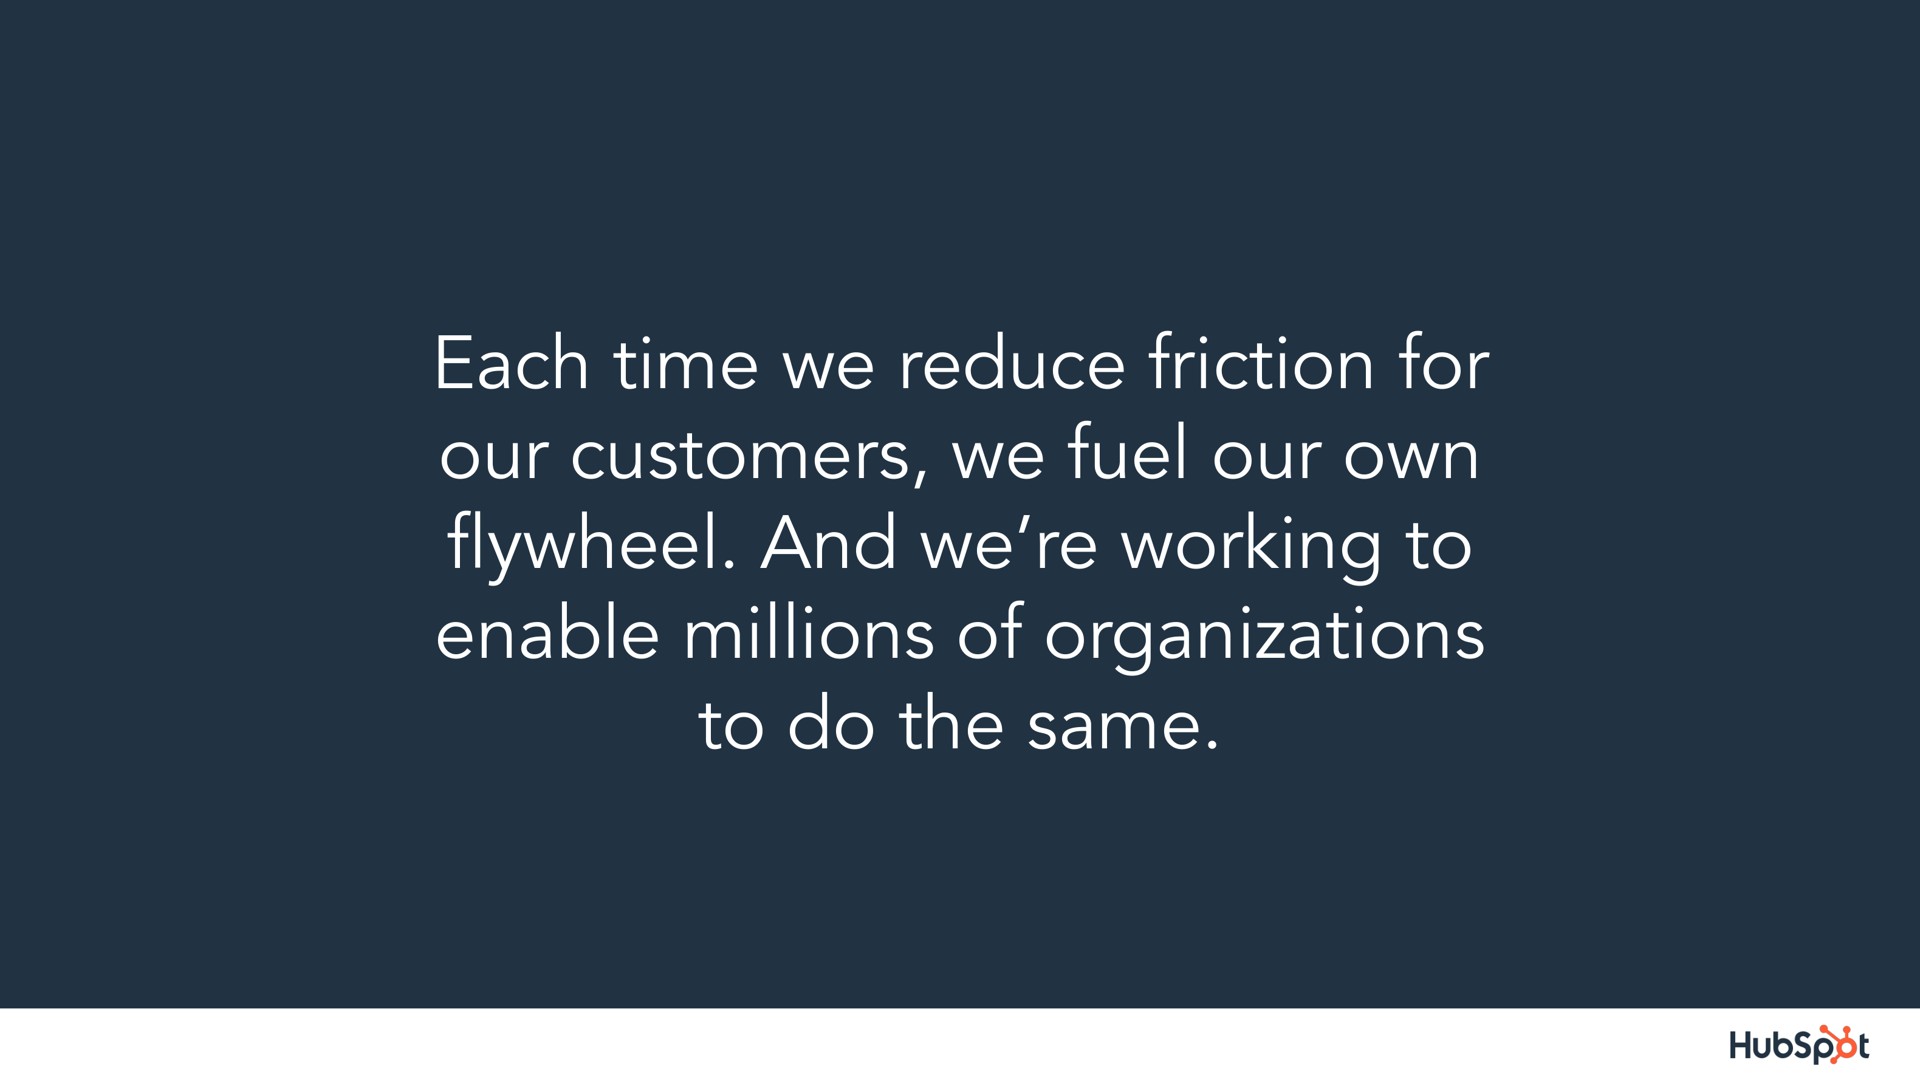 each time we reduce friction for our customers we fuel our own and we working to enable millions of organizations to do the same flywheel | Hubspot